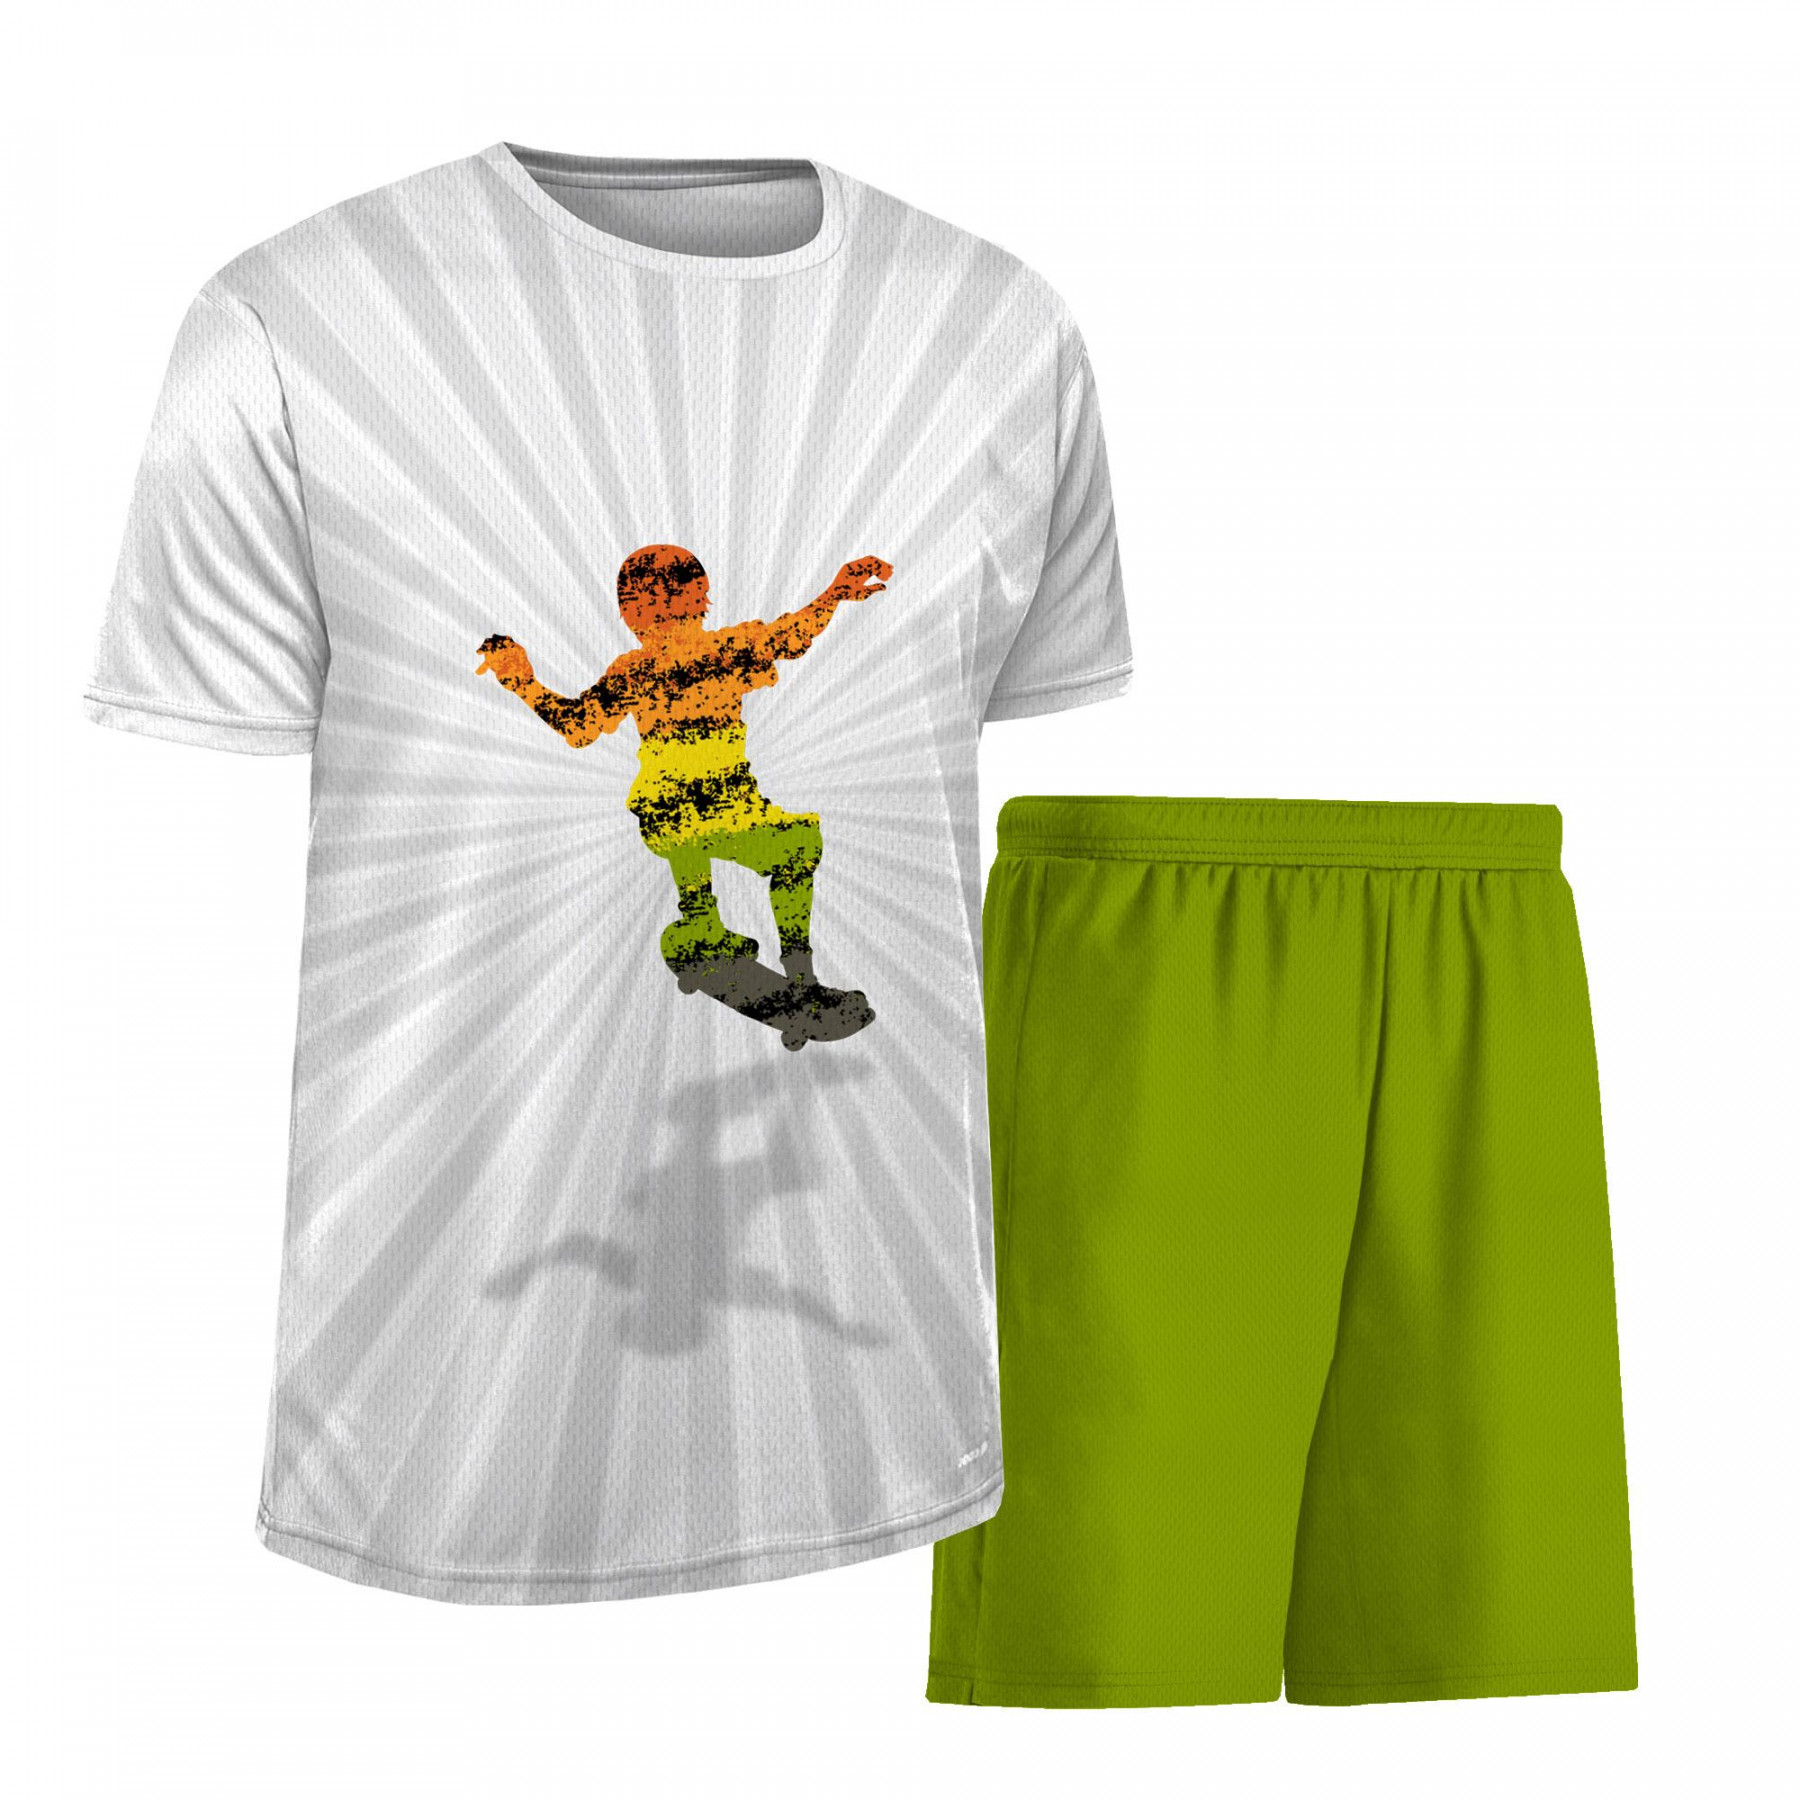 Children's sport outfit "PELE" - SKATER pat. 2 - sewing set 